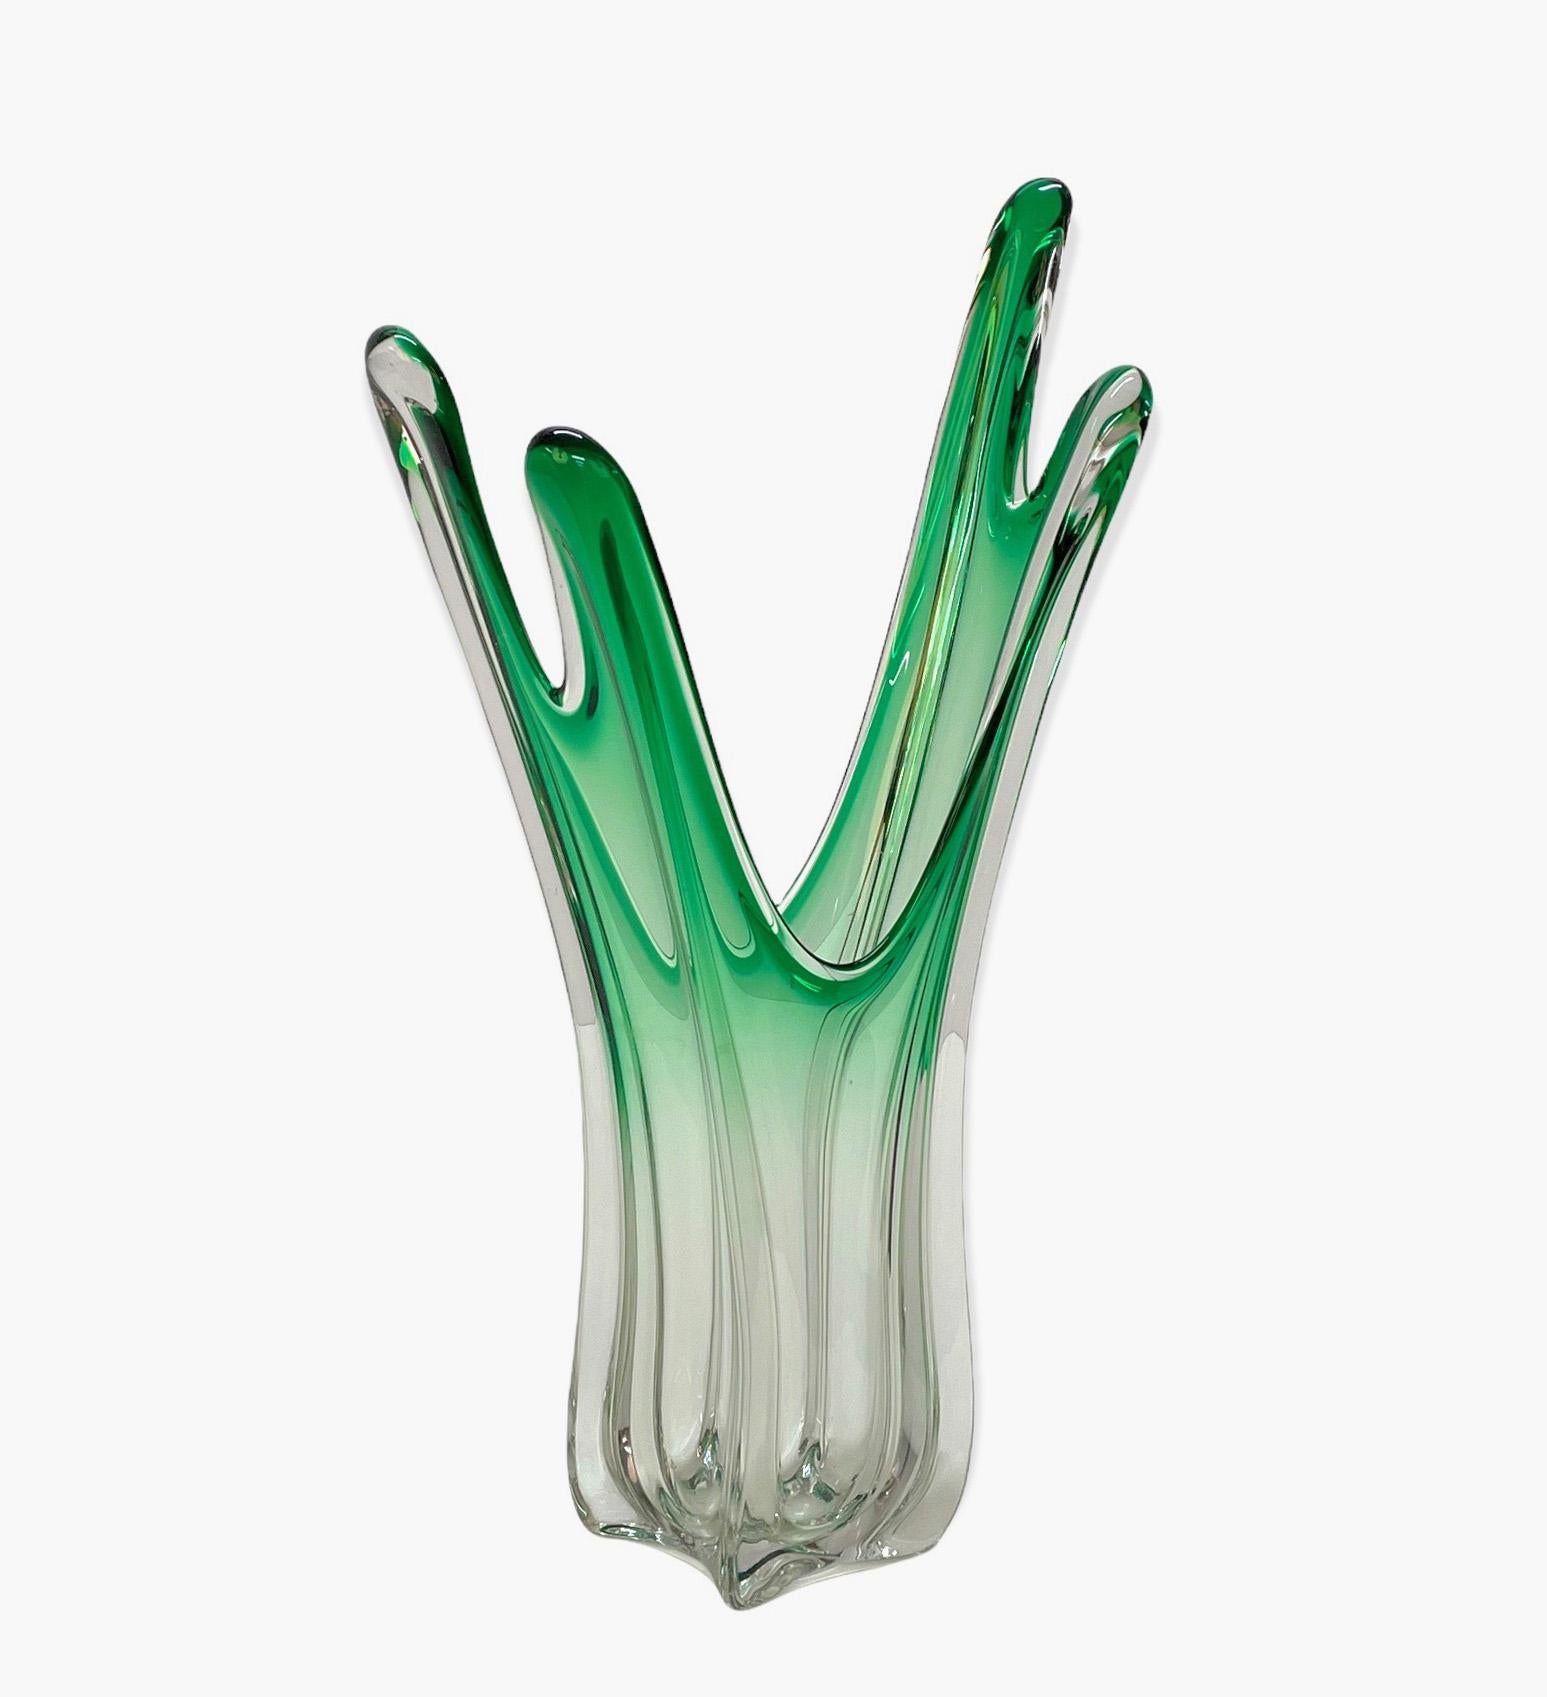 Midcentury Green Art Murano Glass Italian Vase Attributed to F.lli Toso, 1950s For Sale 6